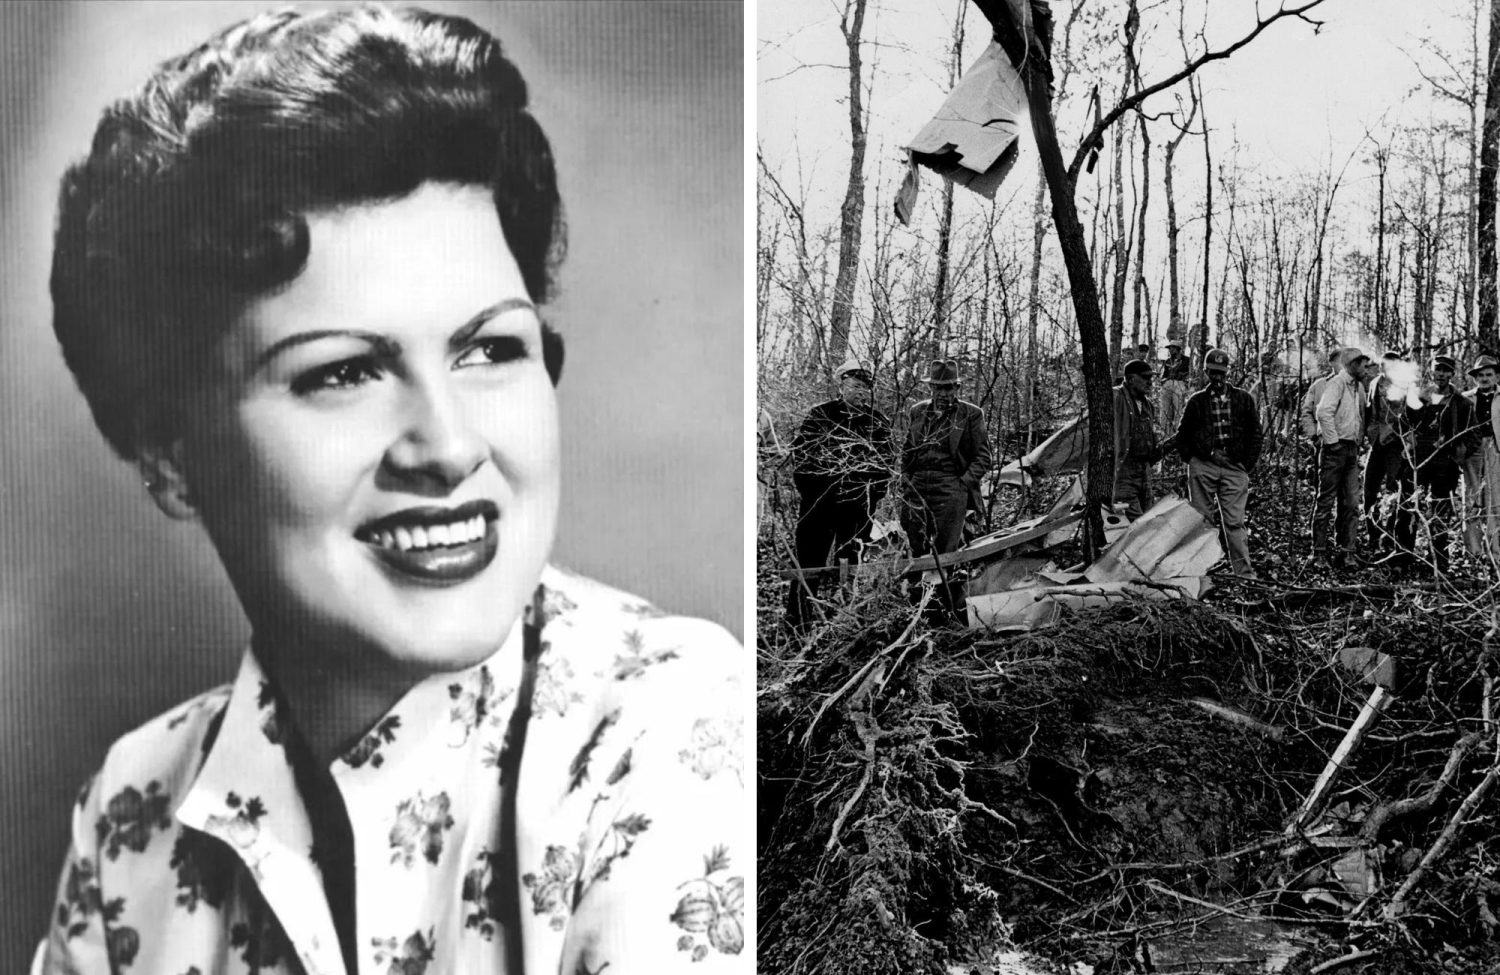 Shocking Patsy Cline's Death In An Airplane Crash